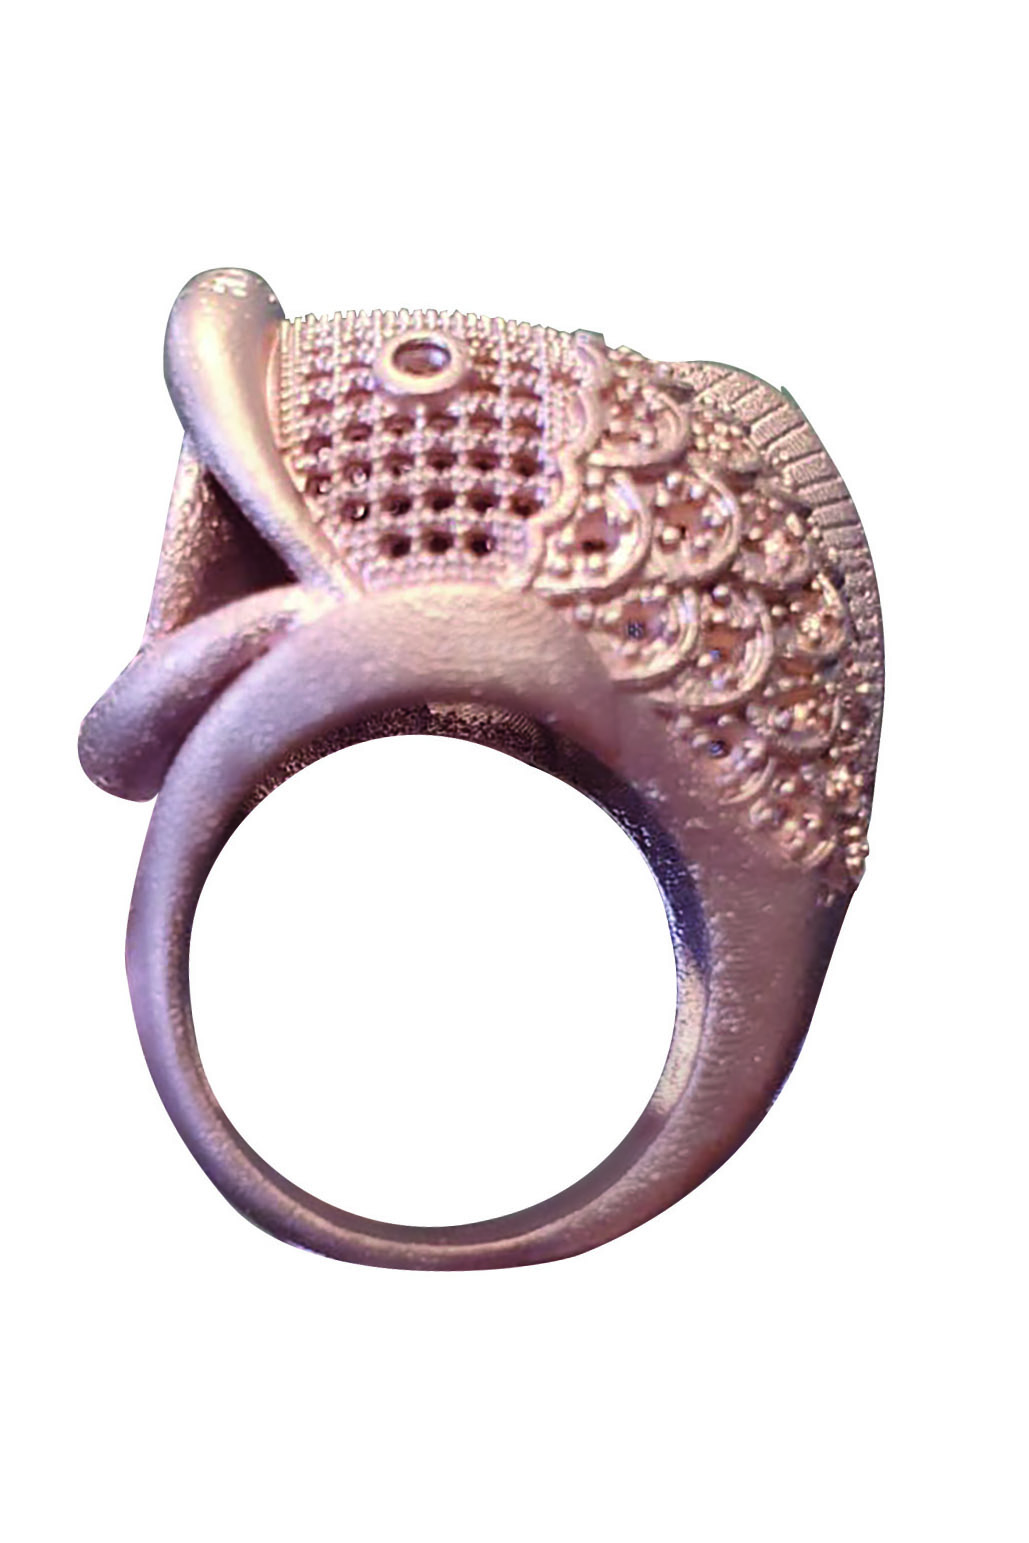 Castable Resin Material for 3D Printing for Jewelry | TIKO-G